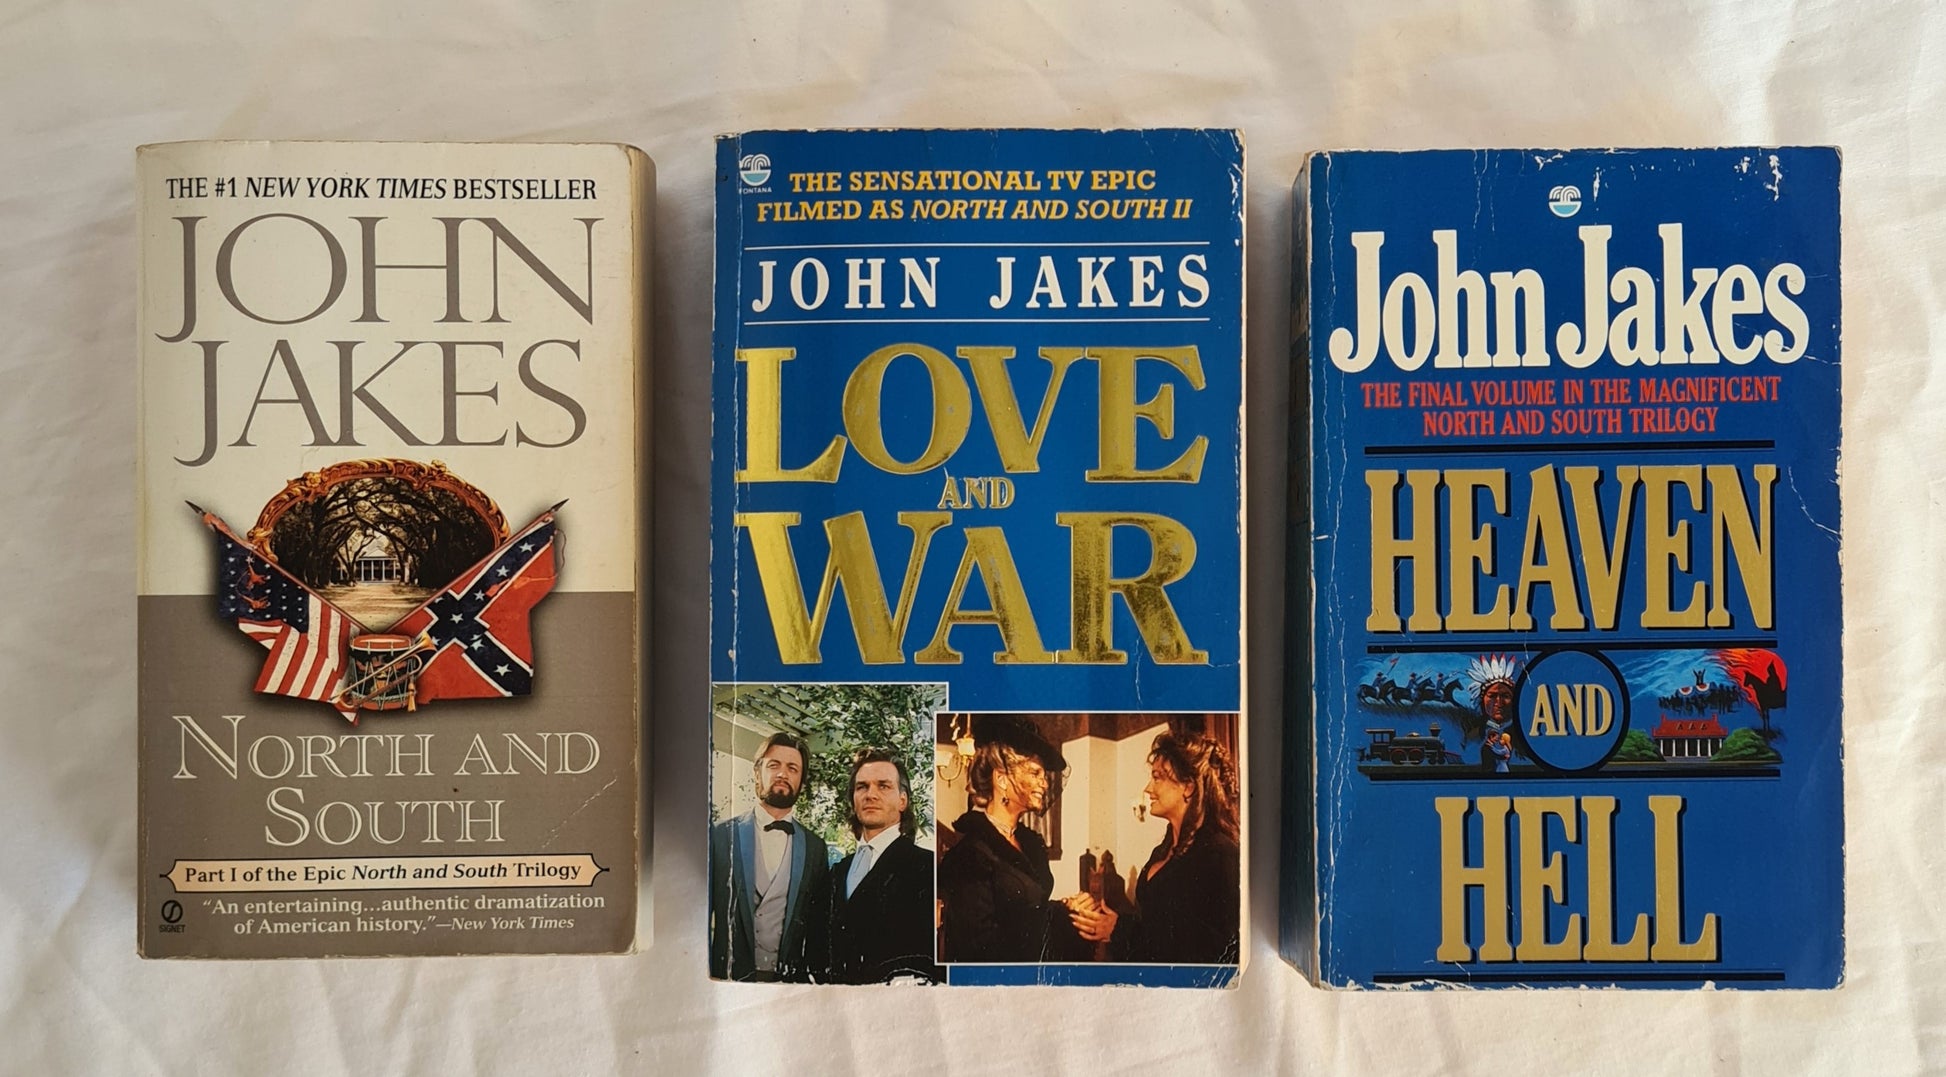 North and South Trilogy  by John Jakes  Complete Trilogy includes all three books, North and South, Love and War, Heaven and Hell